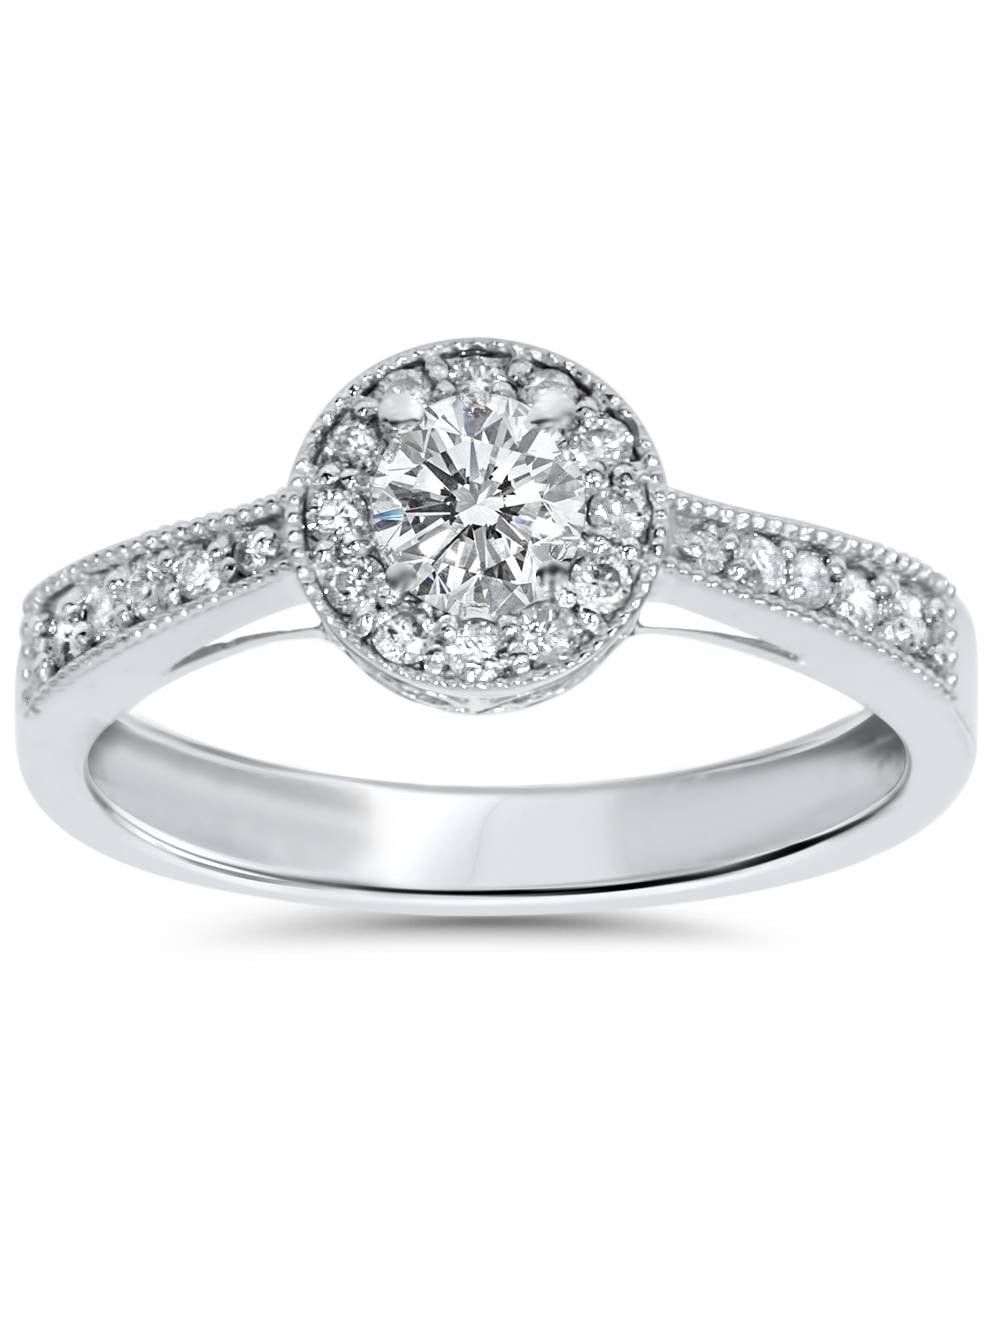 Details about   1.30Ct White Round Diamond Engagement Wedding Ring Solid In 925 Sterling Silver 